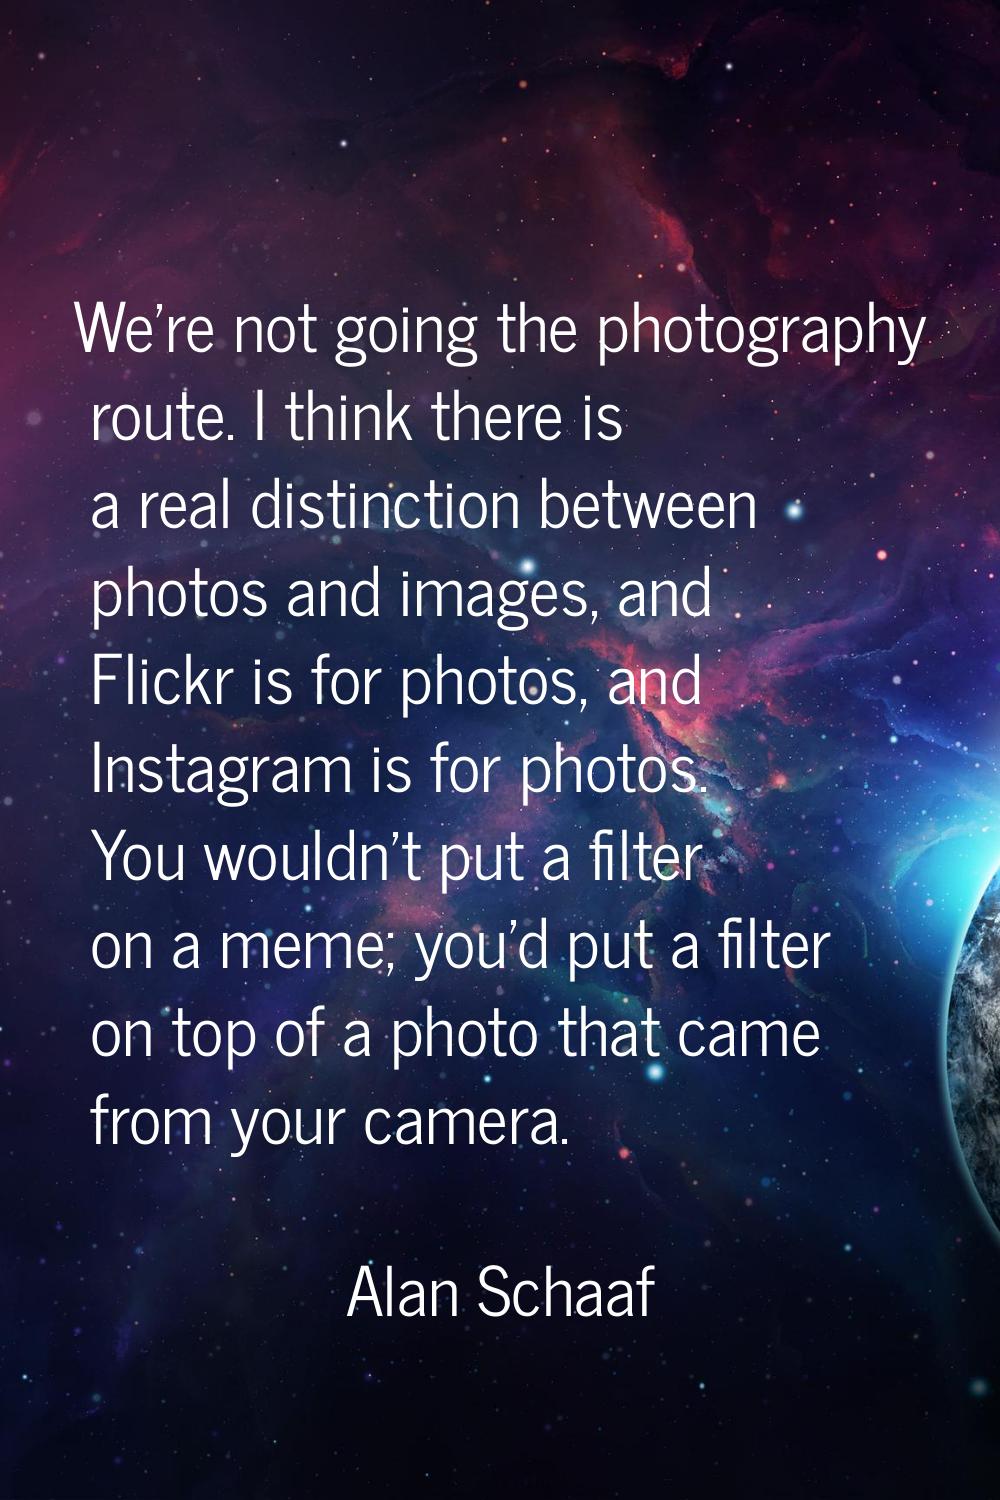 We're not going the photography route. I think there is a real distinction between photos and image